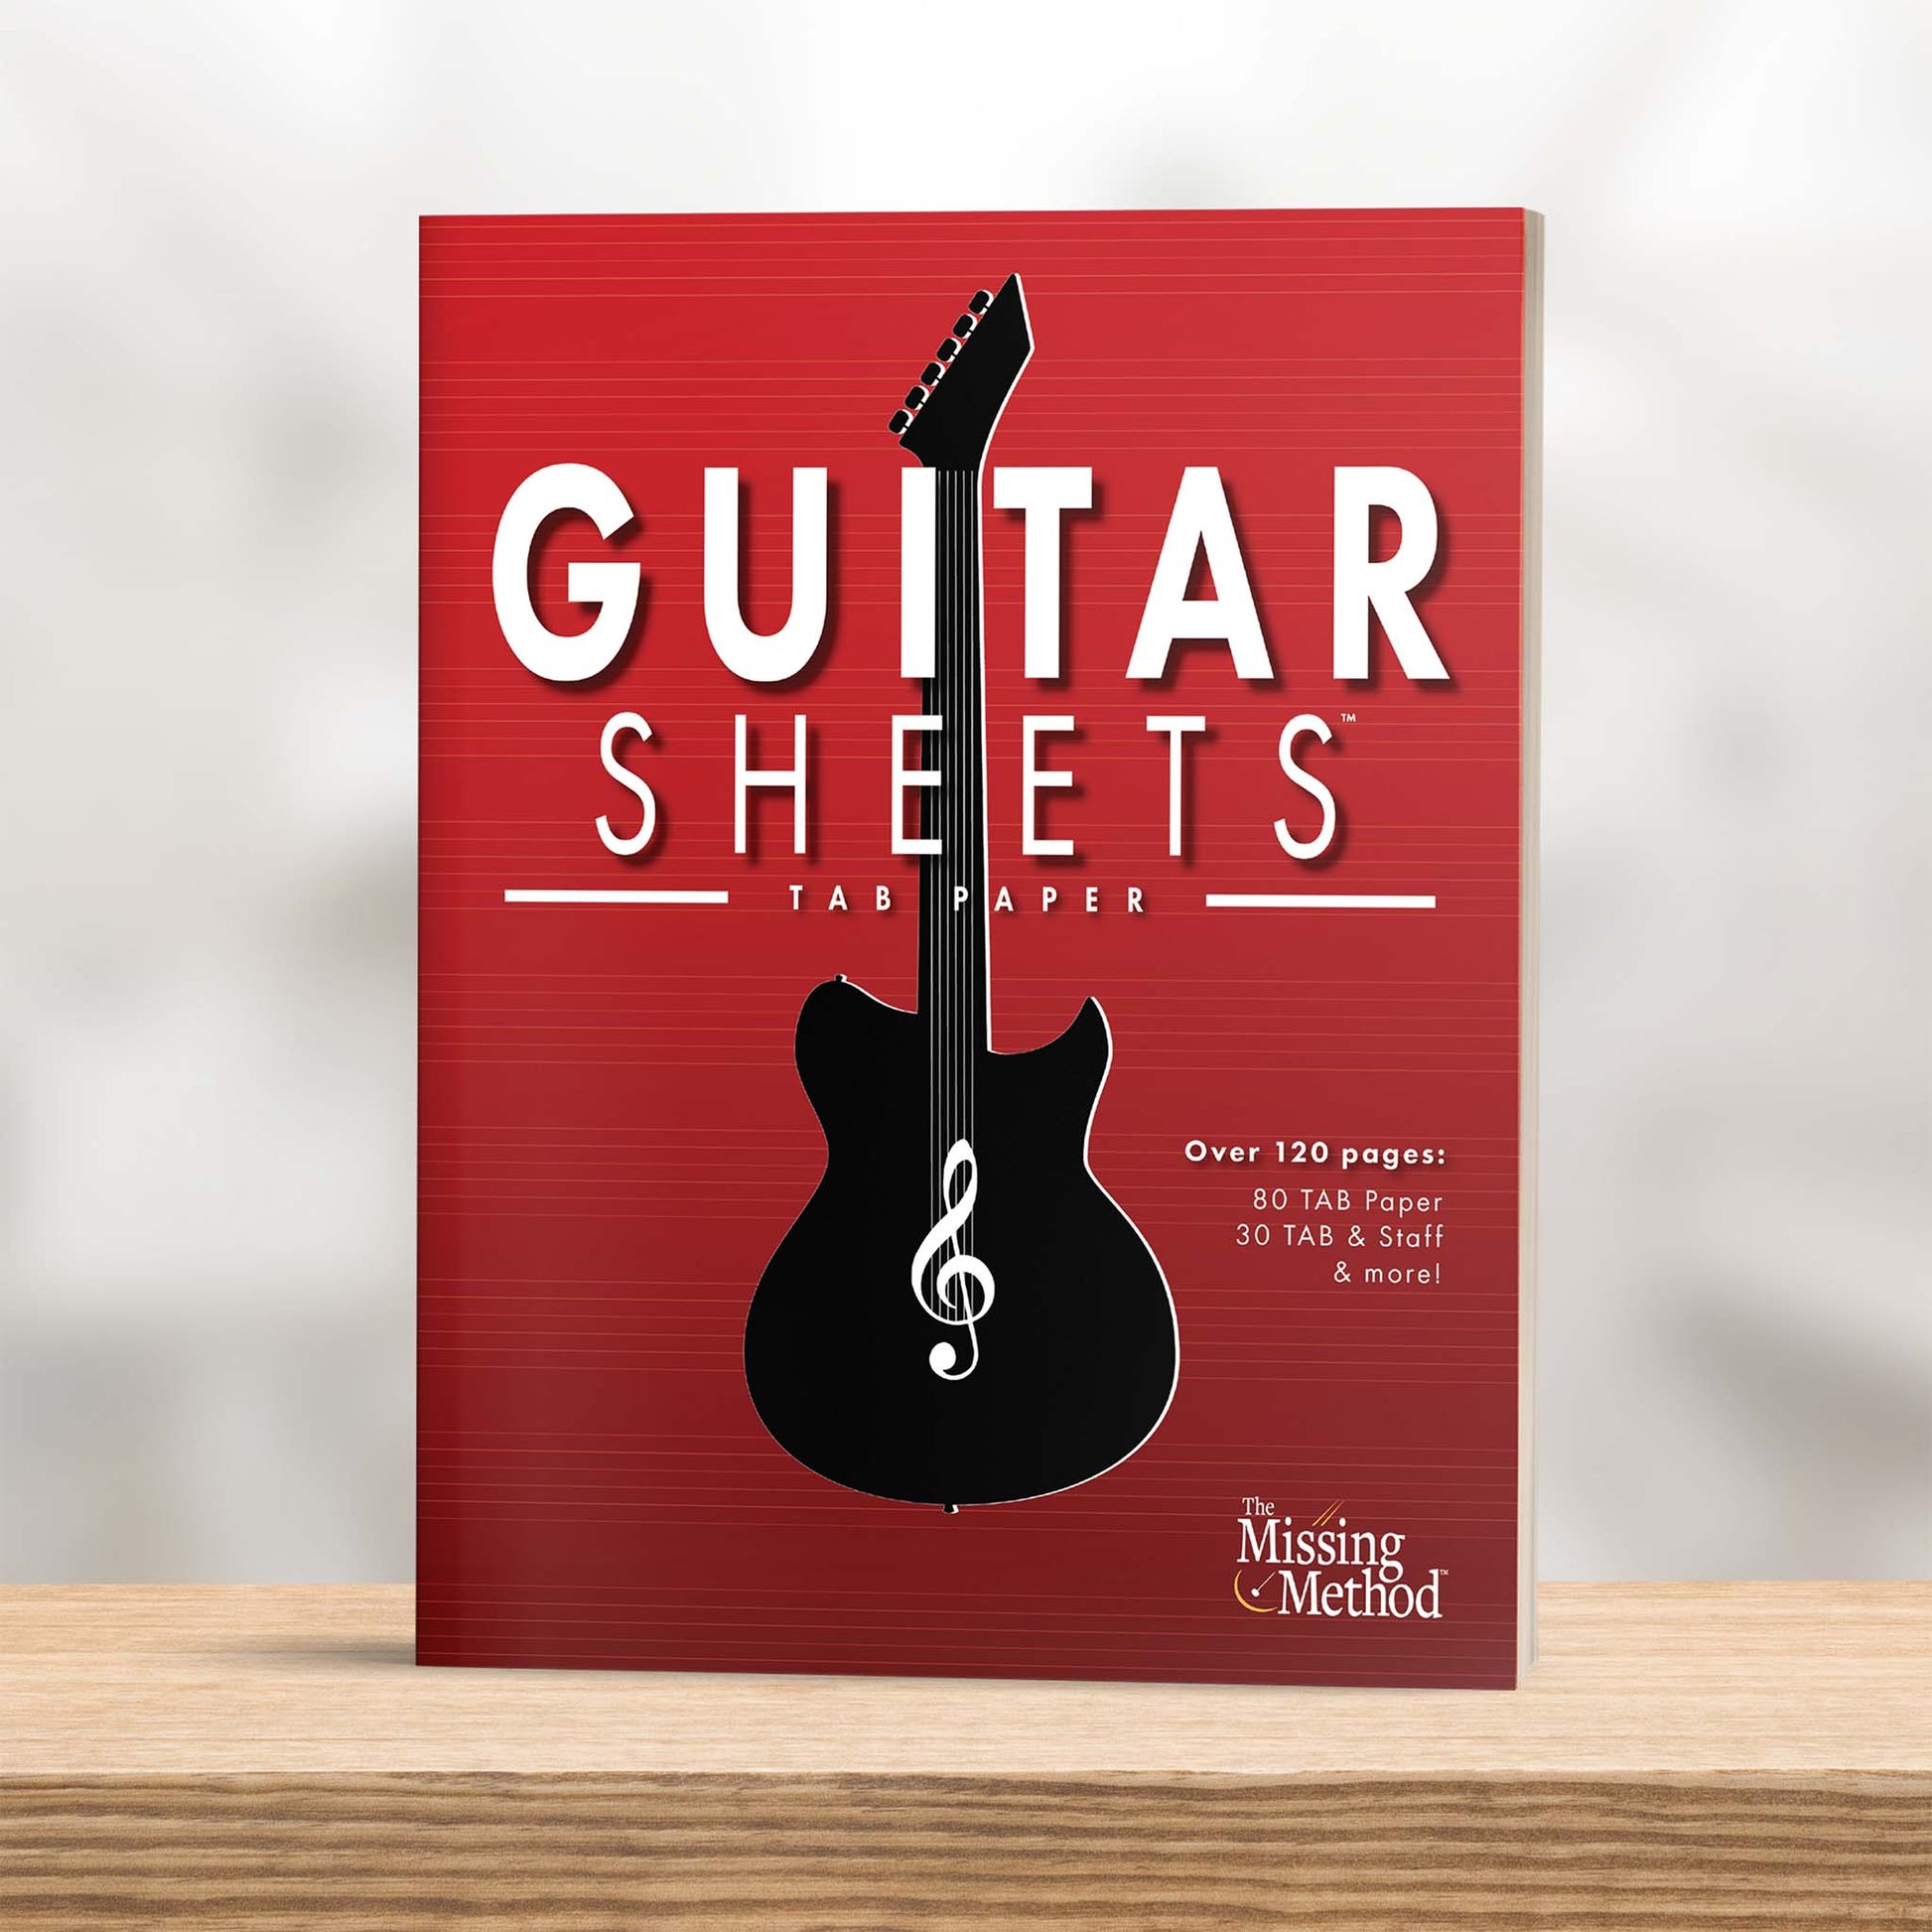 Guitar Sheets Tablature Paper Journal from The Missing Method for Guitar